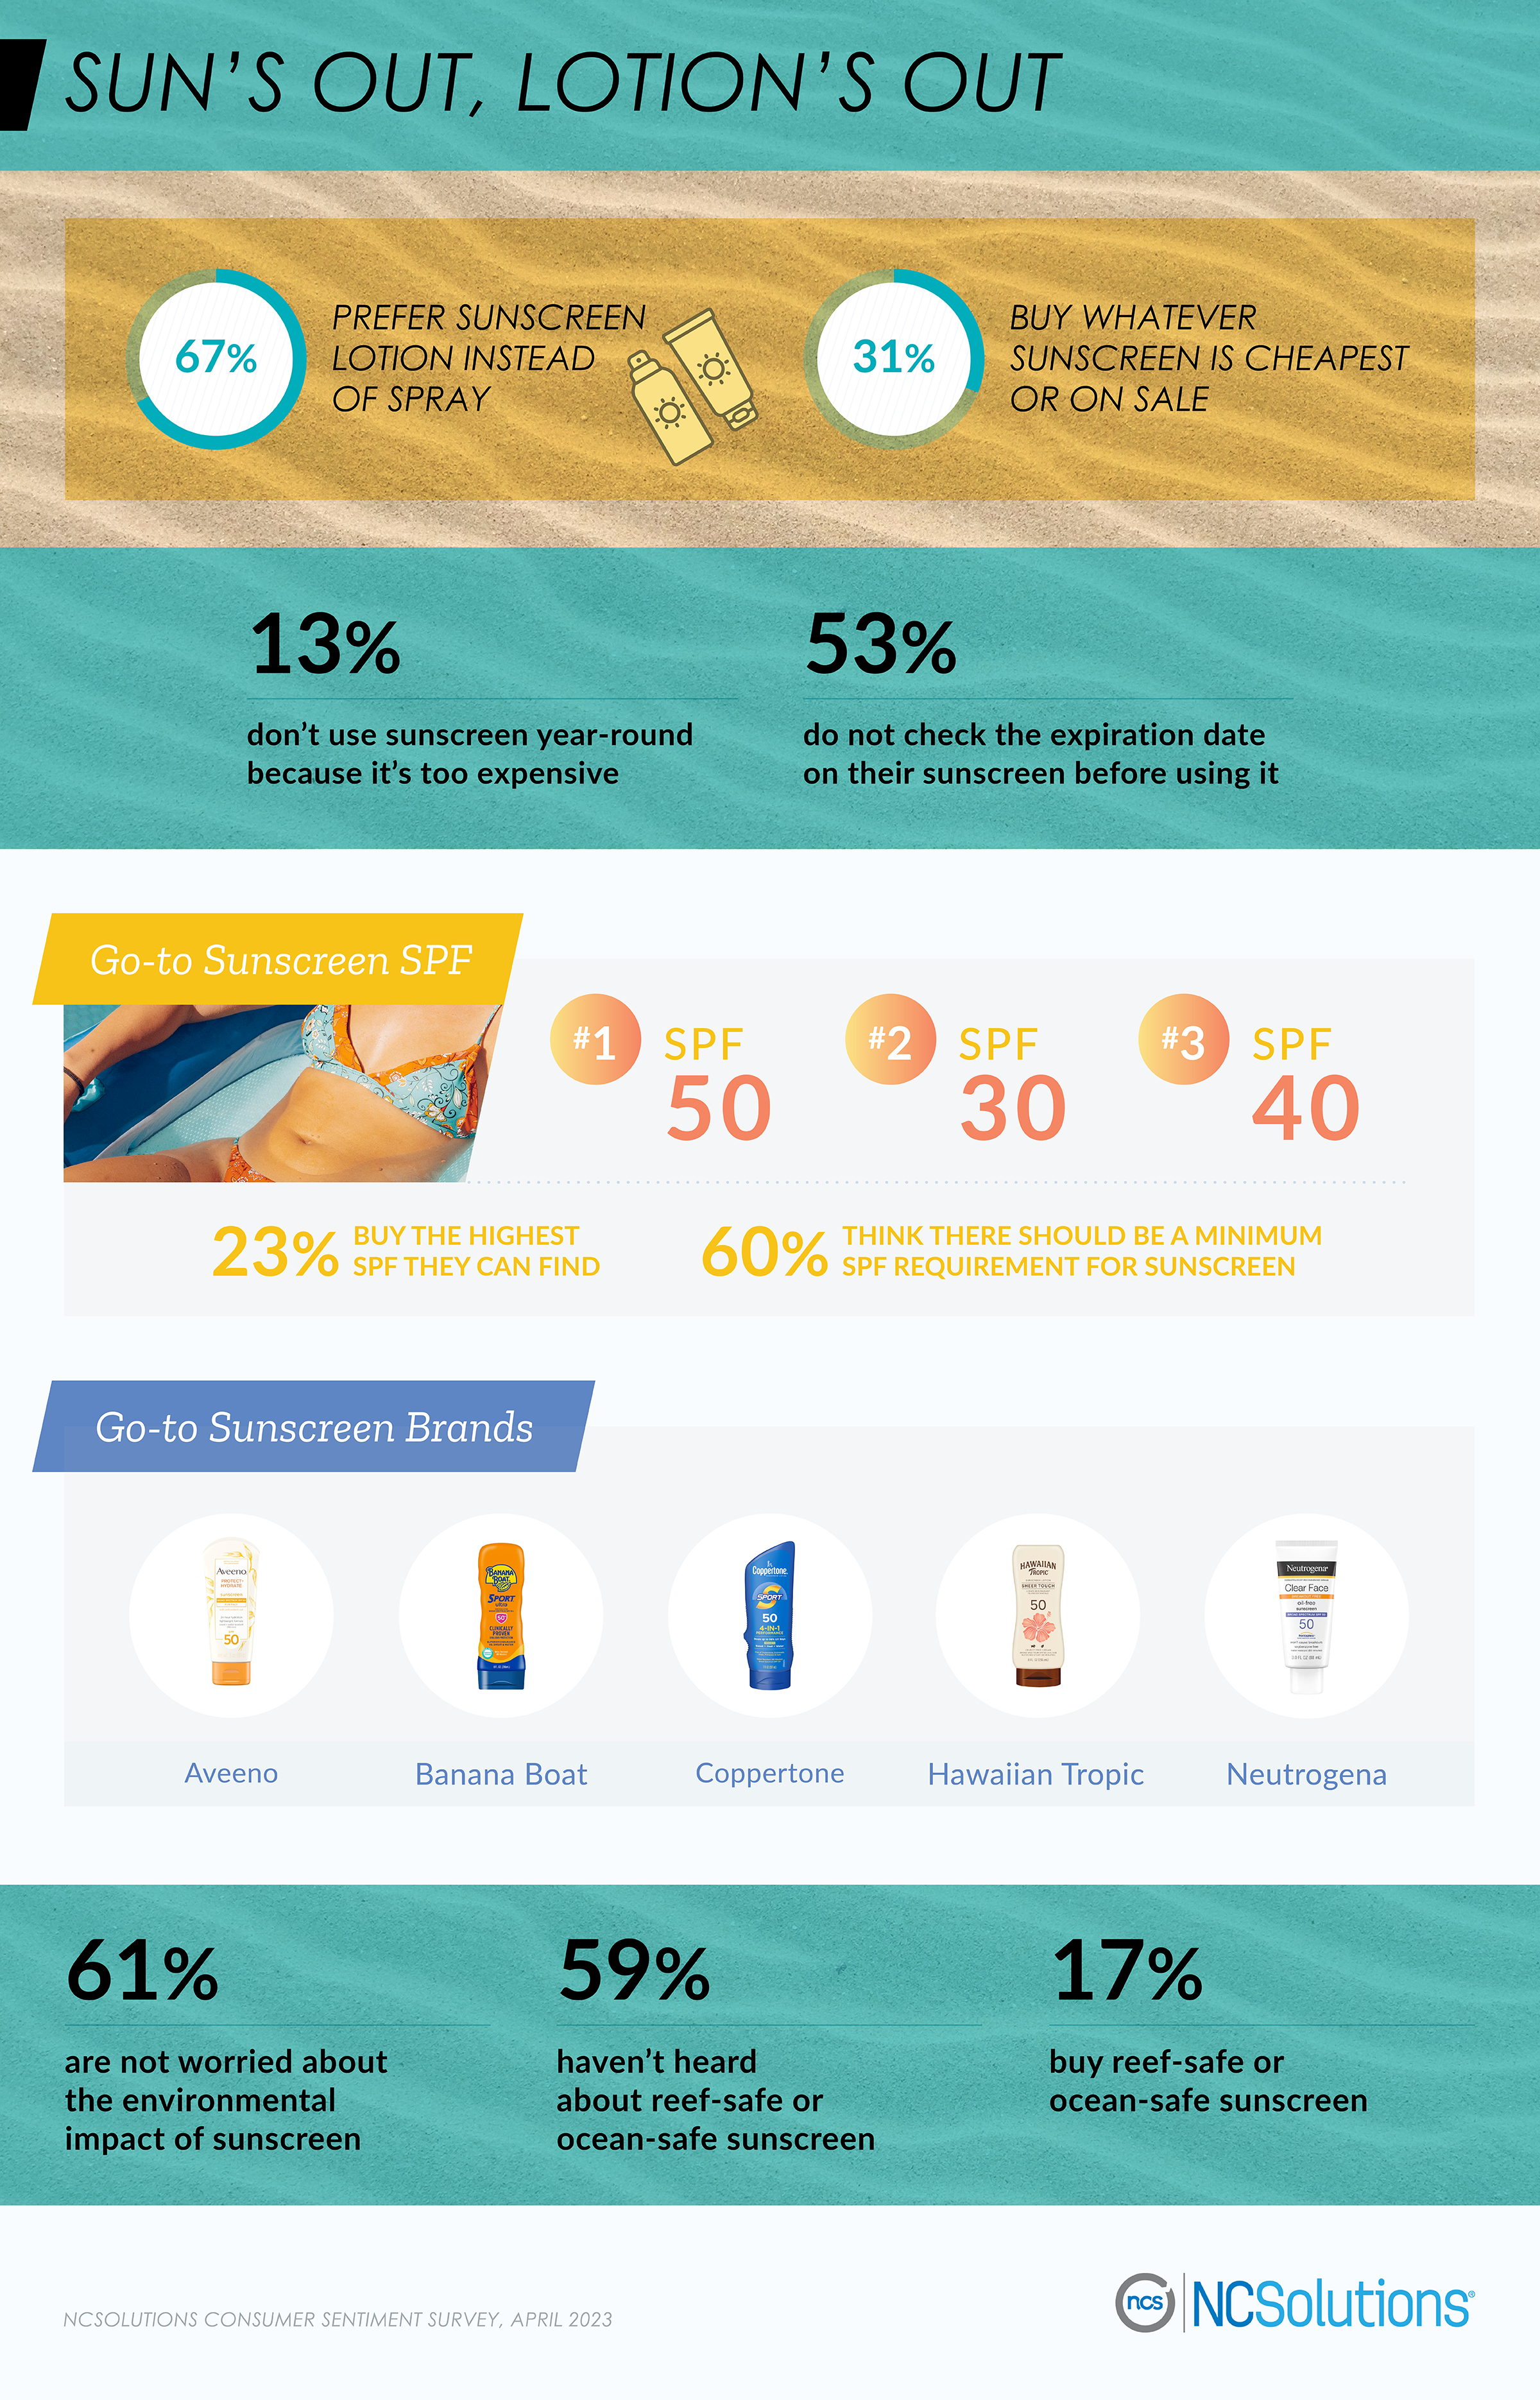  Americans’ Sunscreen SPF and brand preferences - report from ncsolutions.com